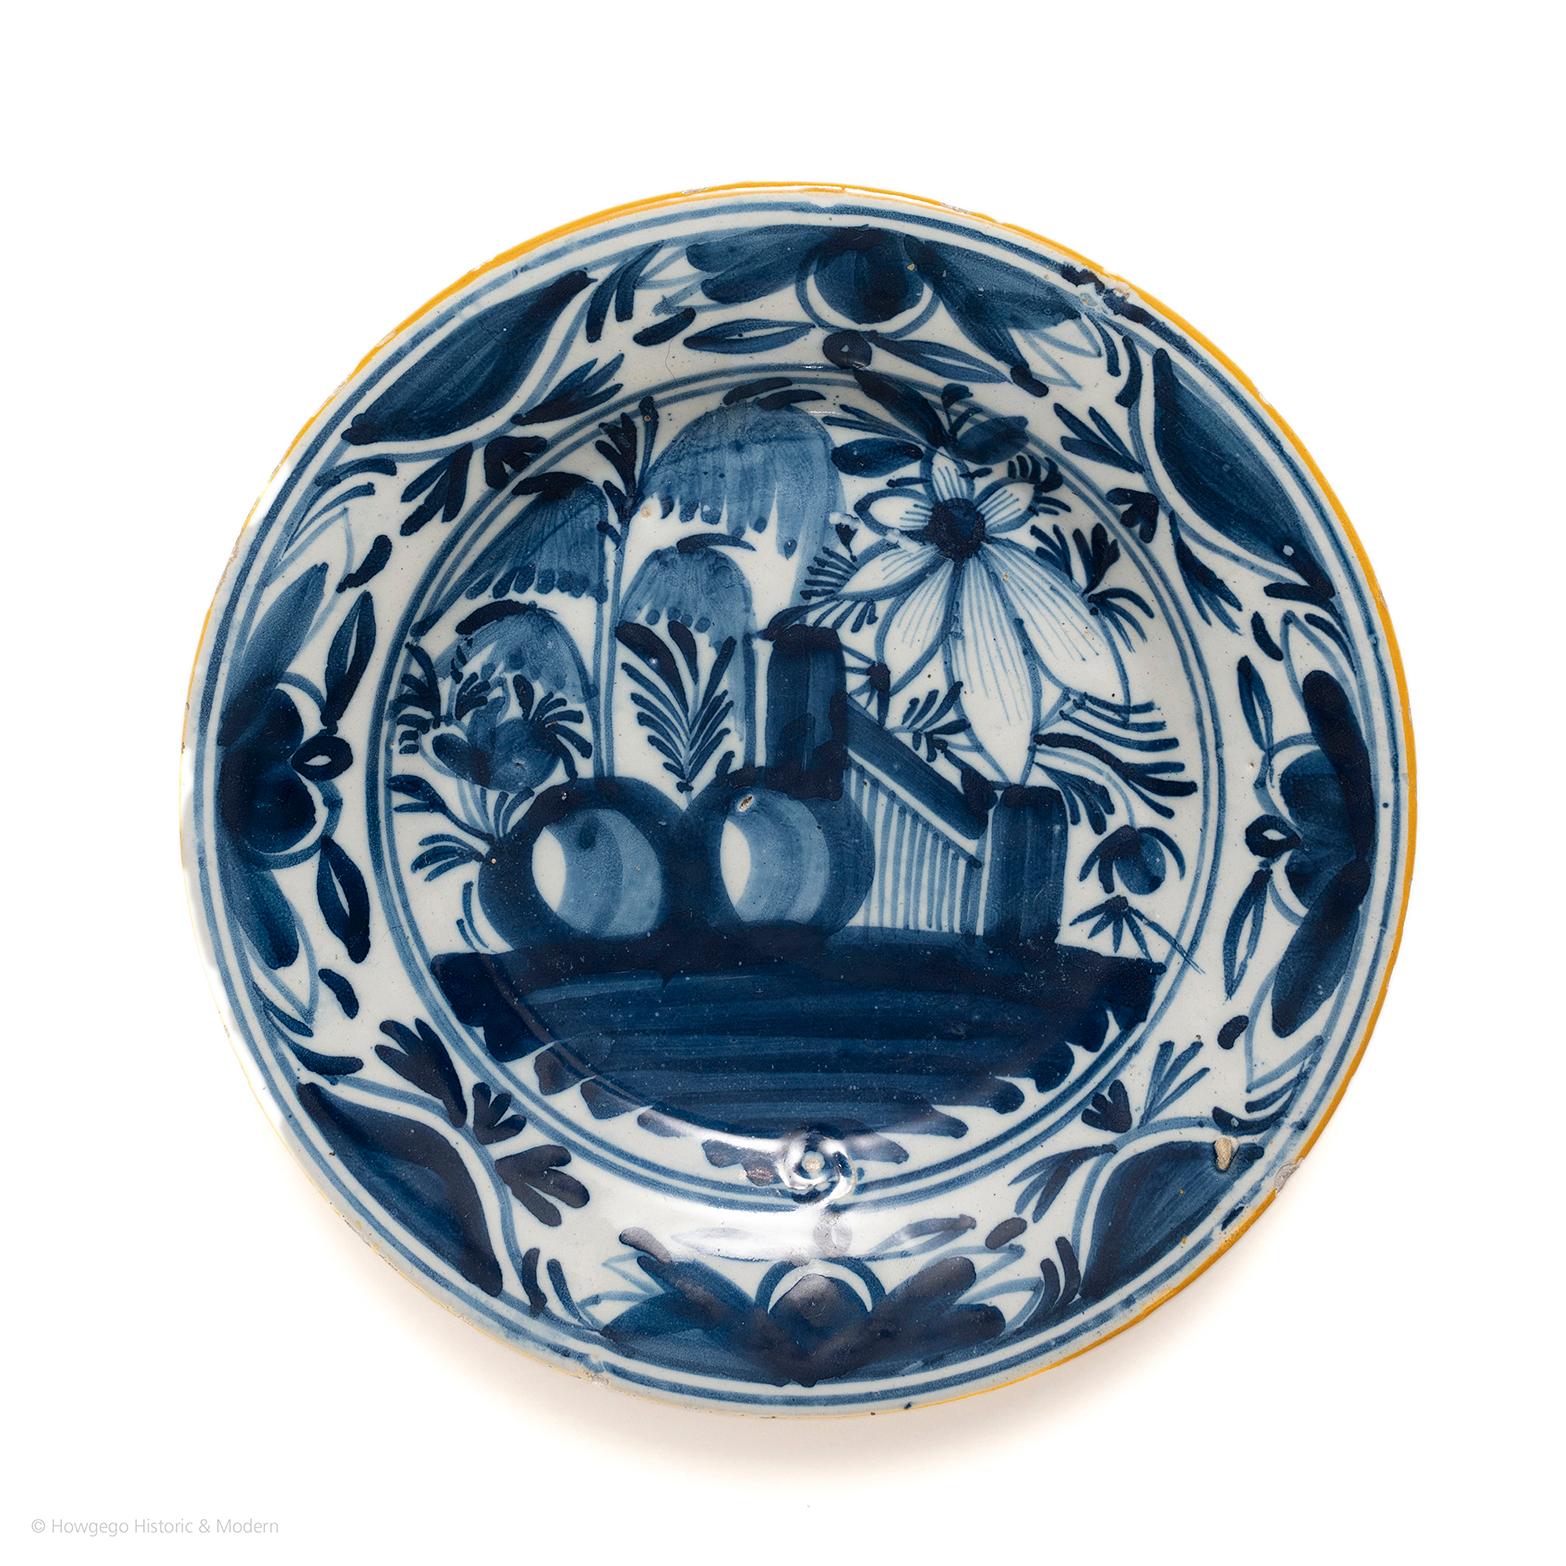 Bold fluid decoration with abundant imagery associated with early Dutch pieces. 

Profusely painted with a chinoiserie garden scene with bold foliage and sprays. The rim painted with eight repeats of stylised foliage. Painted in blue on a white